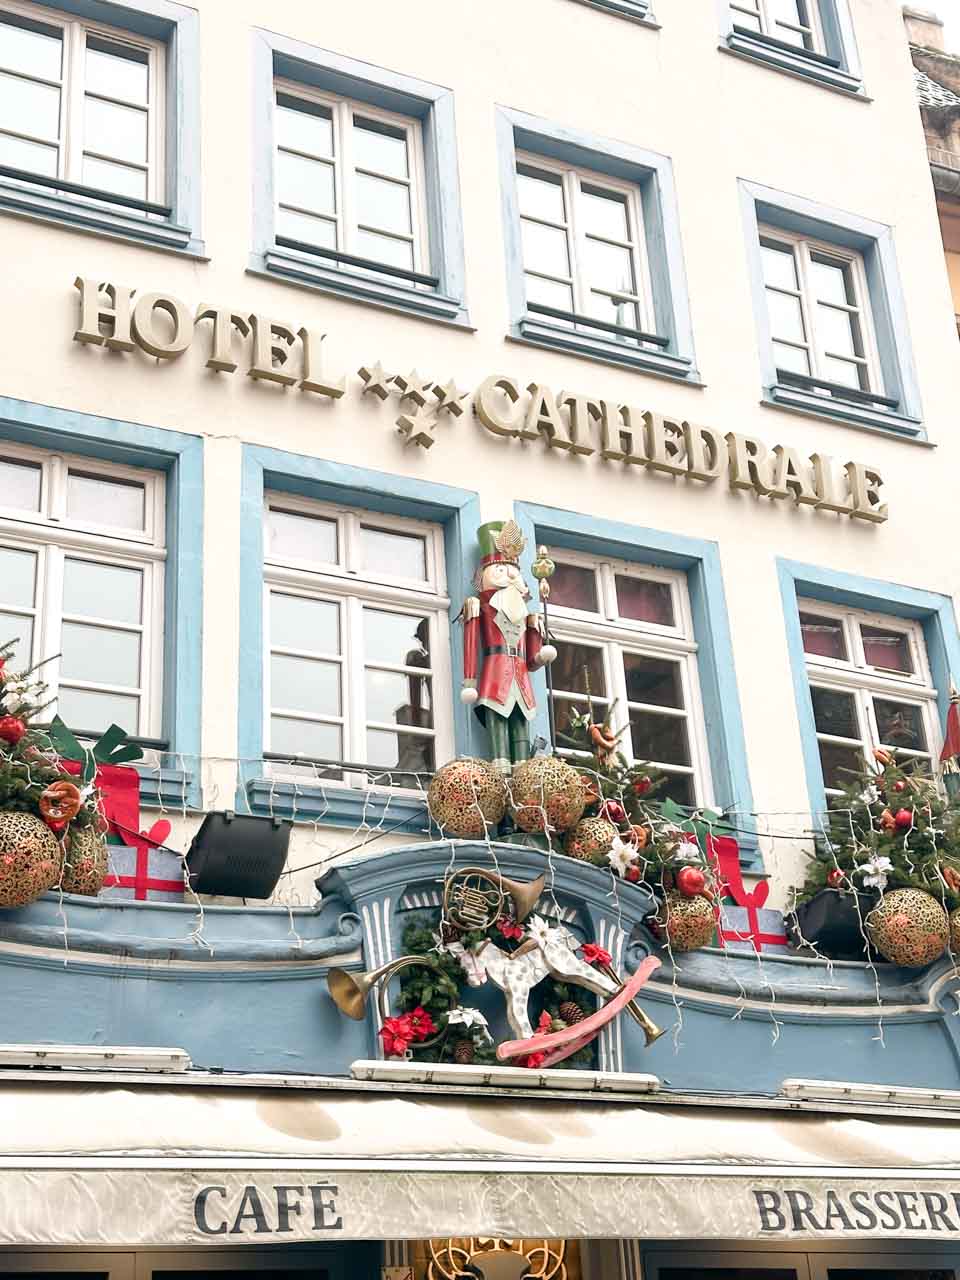 The façade of Hôtel Cathédrale in Strasbourg festively decorated with a nutcracker figure, baubles, and wreaths